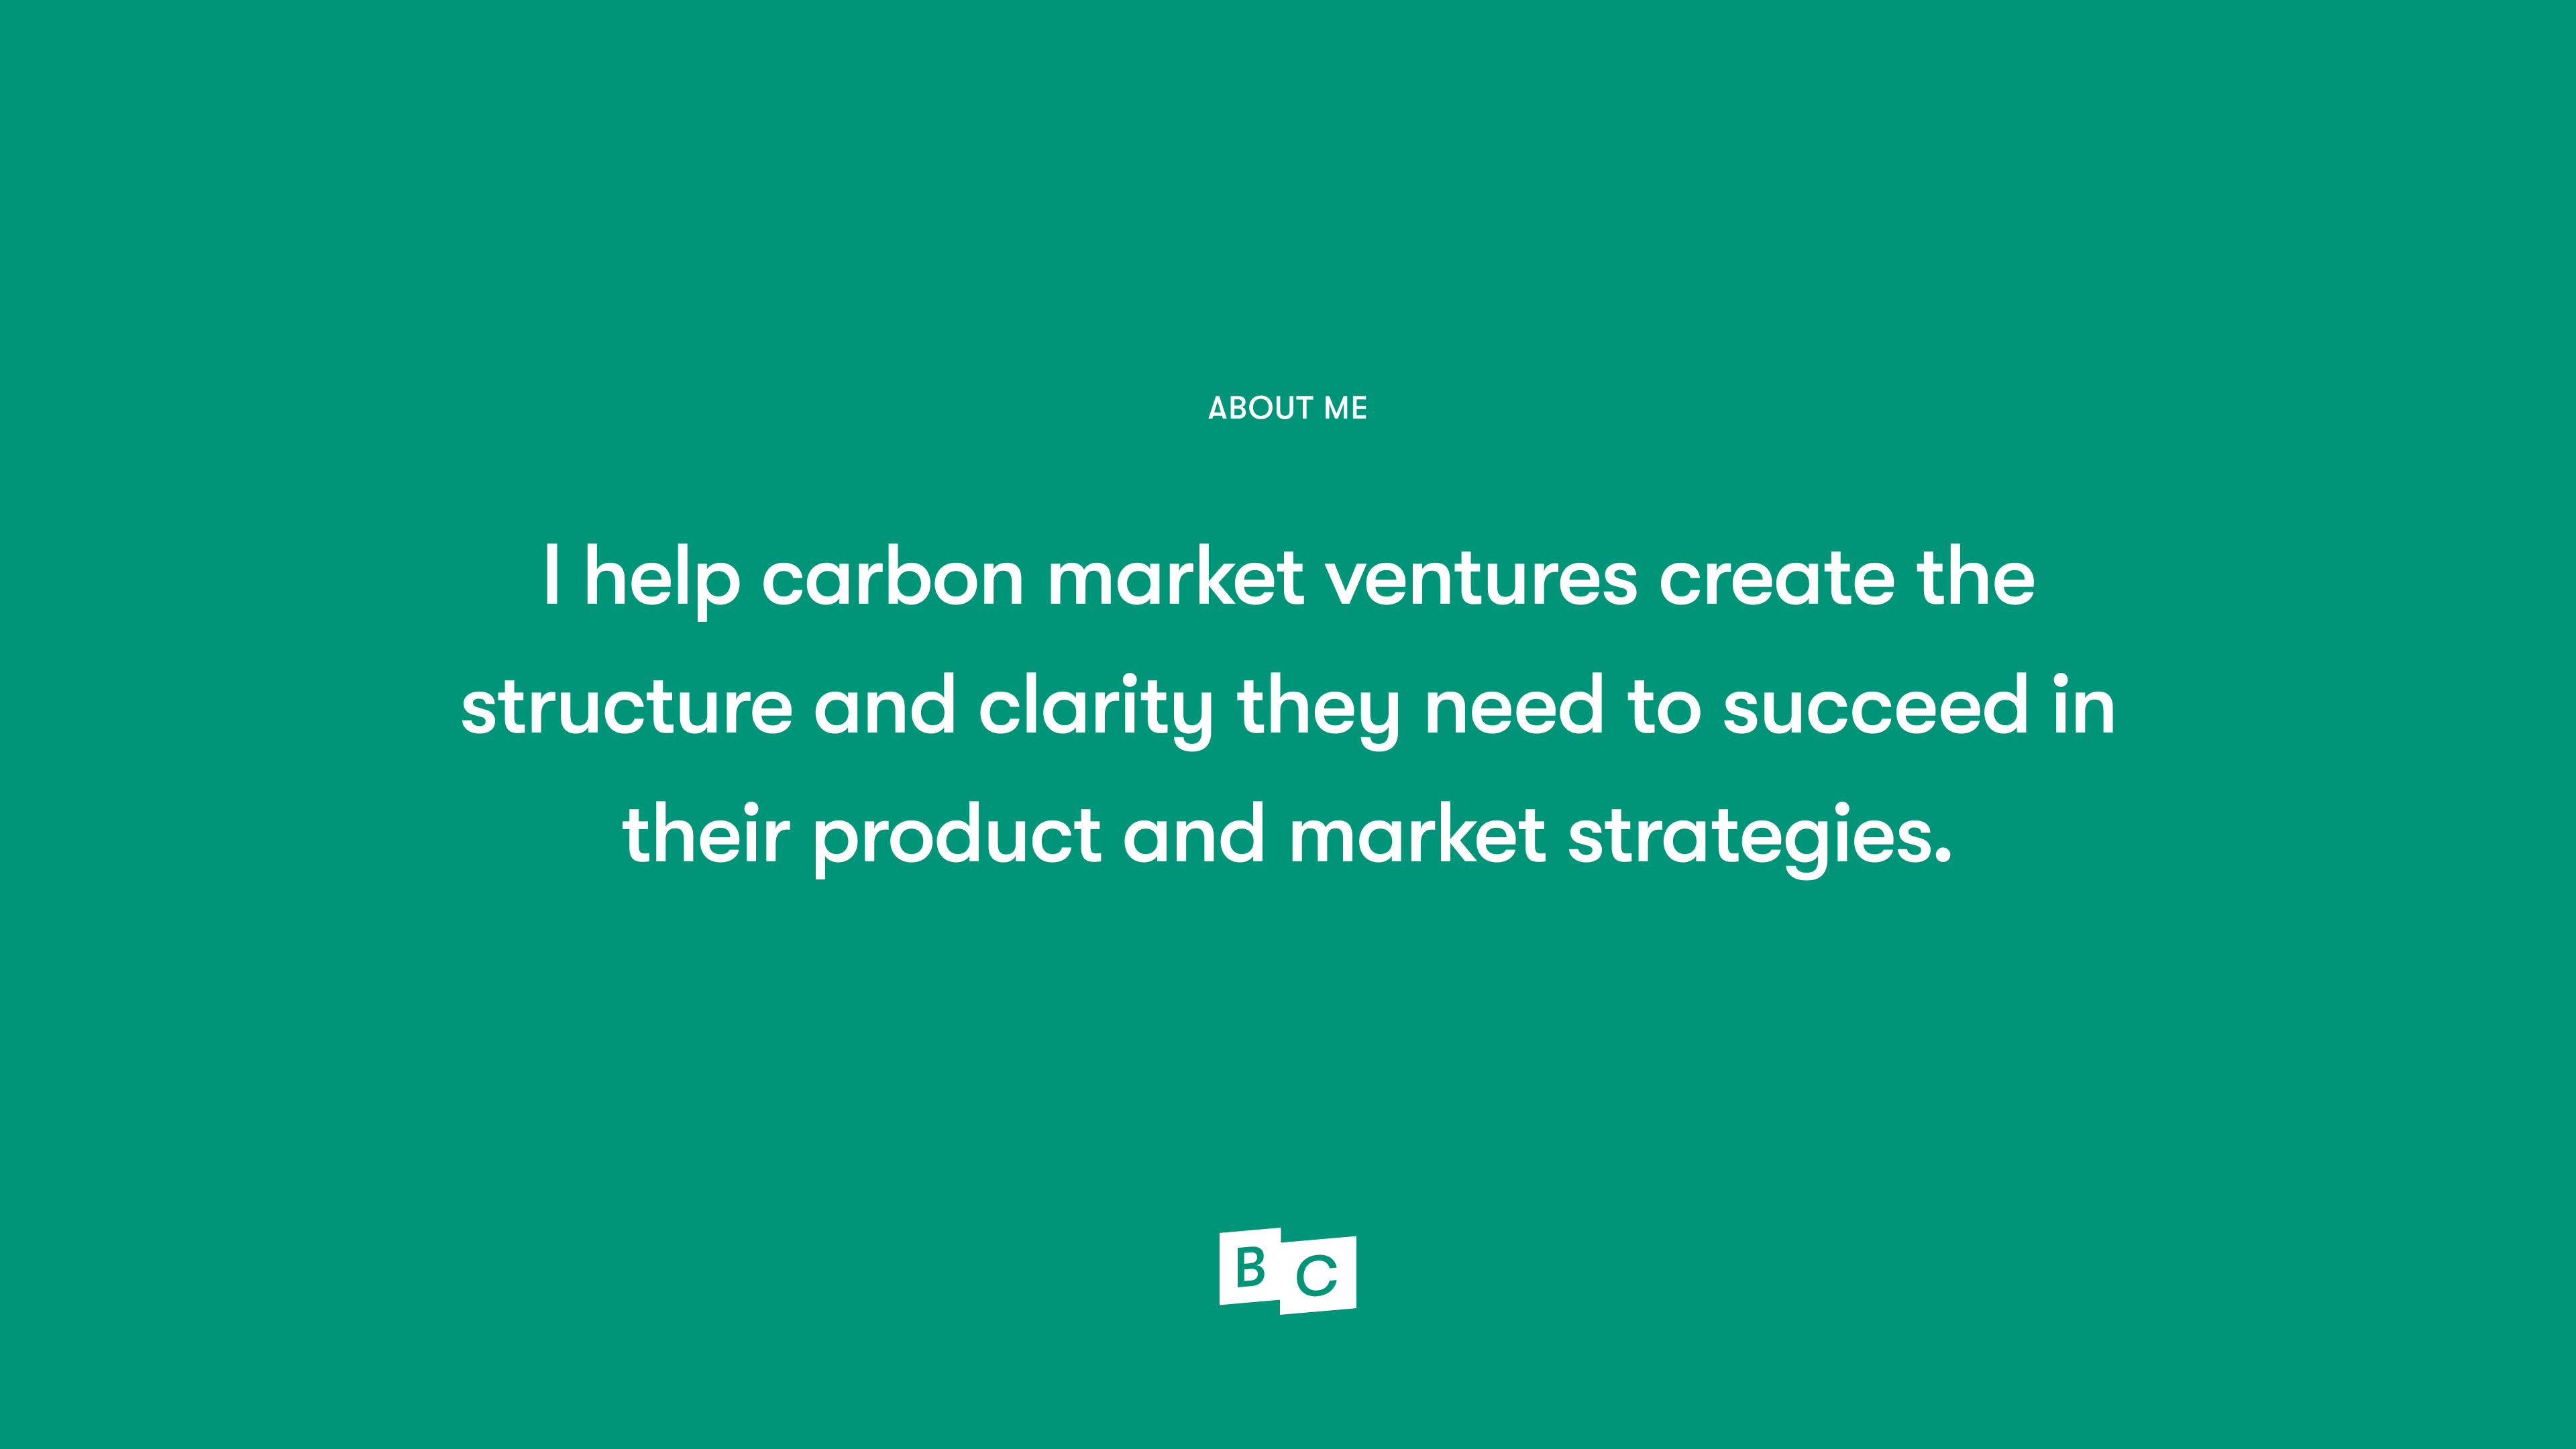 White text on top of dark green background that says, “I help carbon market ventures create the structure and clarity they need to succeed in their product and market strategies.”